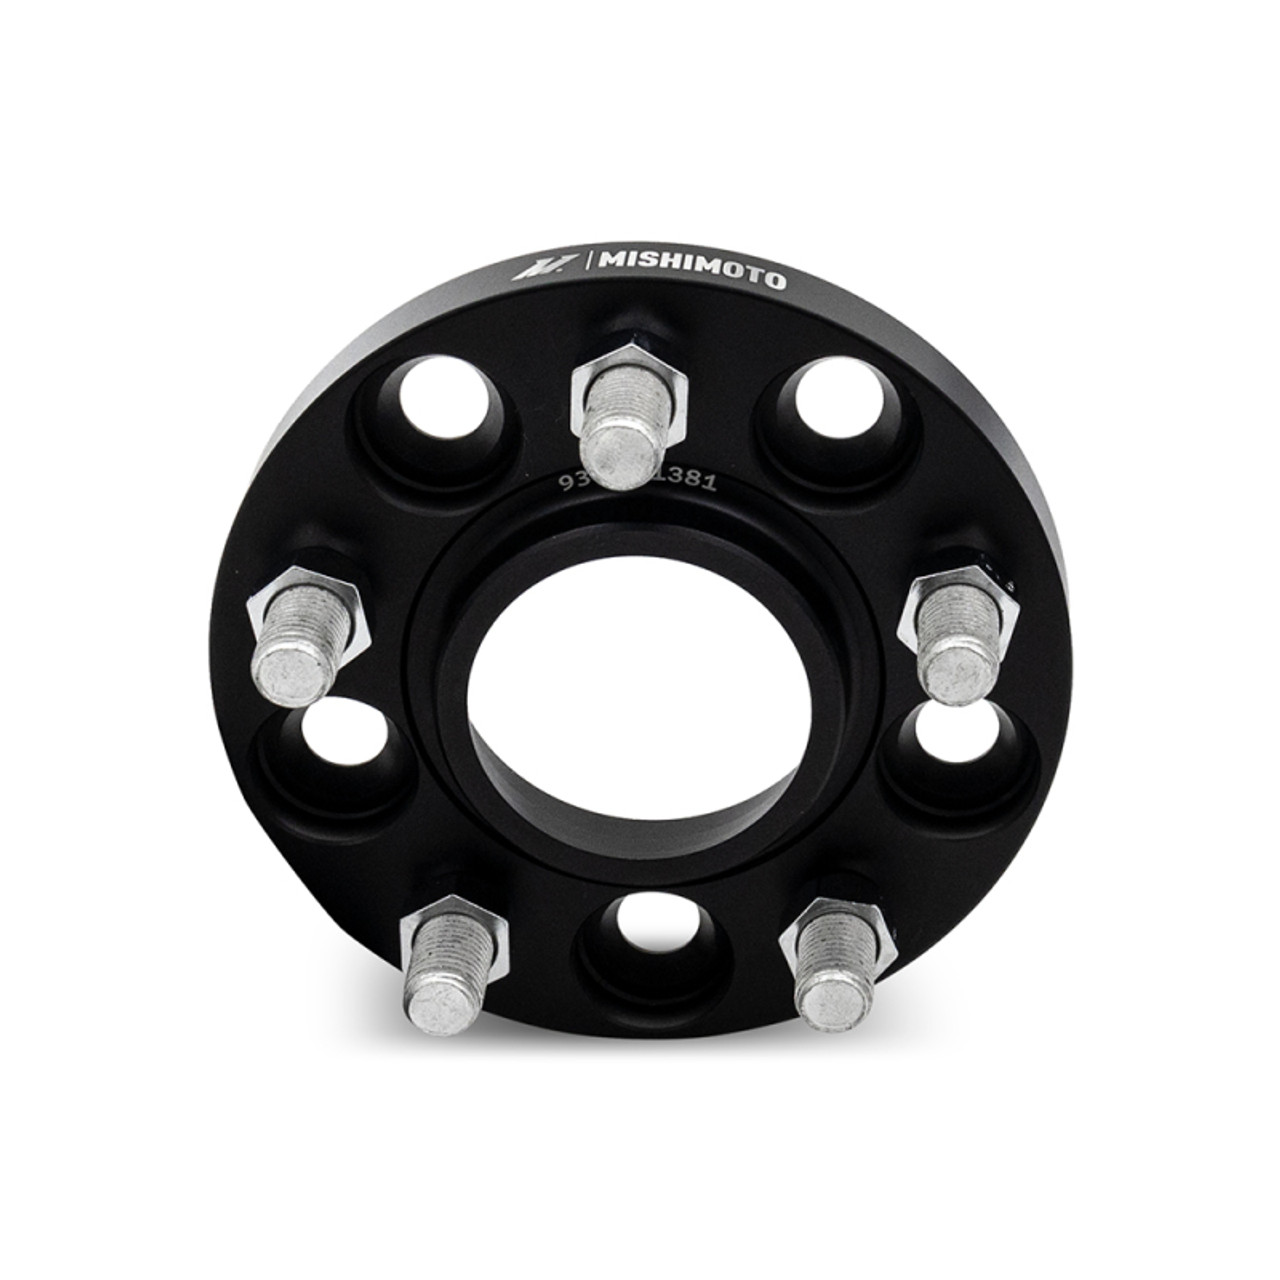 Mishimoto 5x114.3 15mm 56.1 Bore M12 Wheel Spacers - Black - MMWS-003-150BK - Front